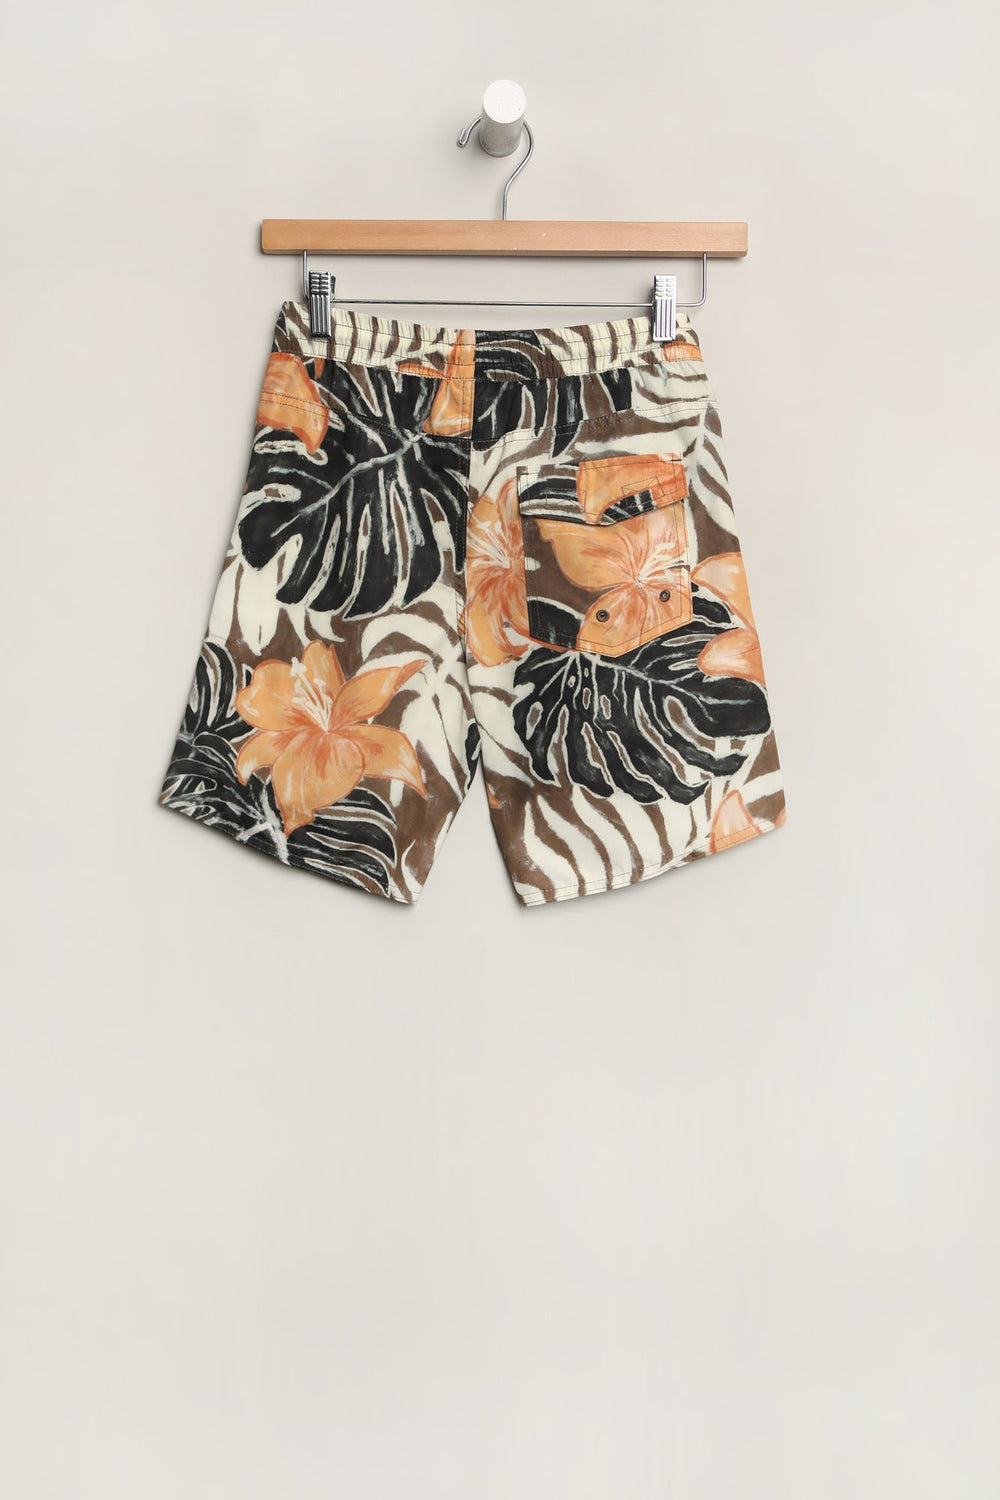 West49 Youth Tropical Print Beach Shorts West49 Youth Tropical Print Beach Shorts